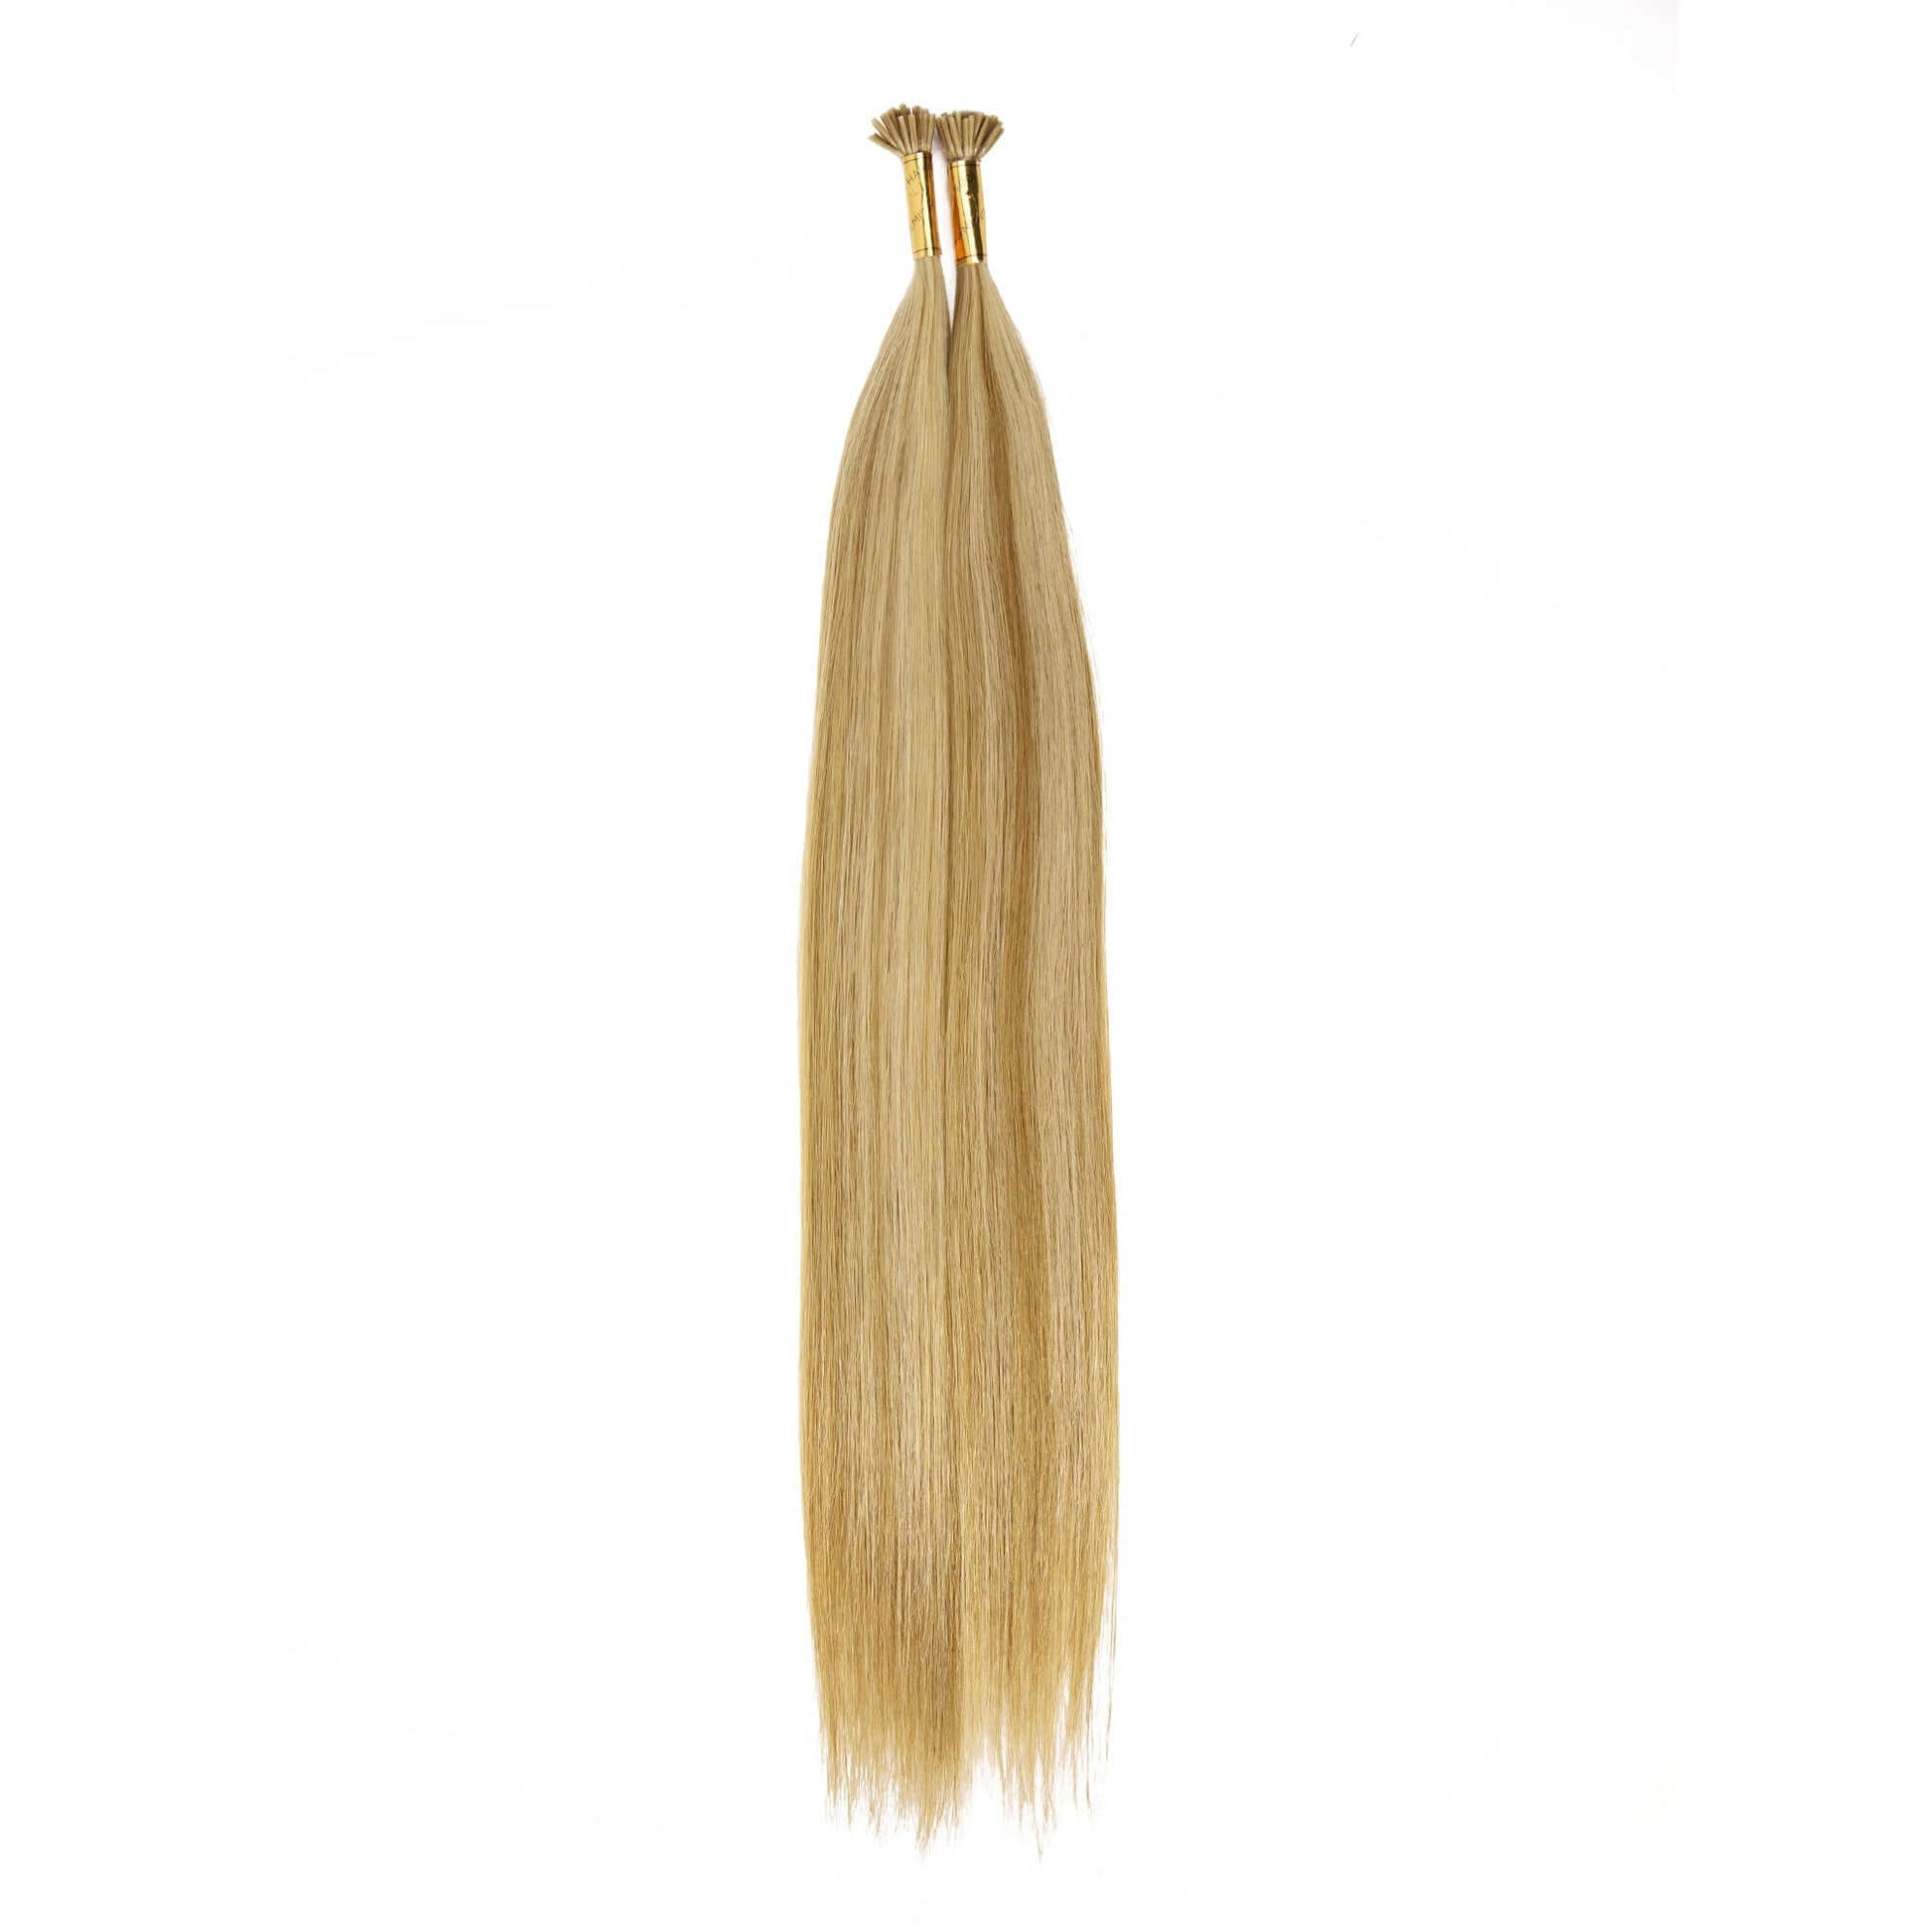 22" Bohyme Luxe I-Tip - Silky Straight - 60pcs - H14/BL22 - BLIS60-22-H14/BL22